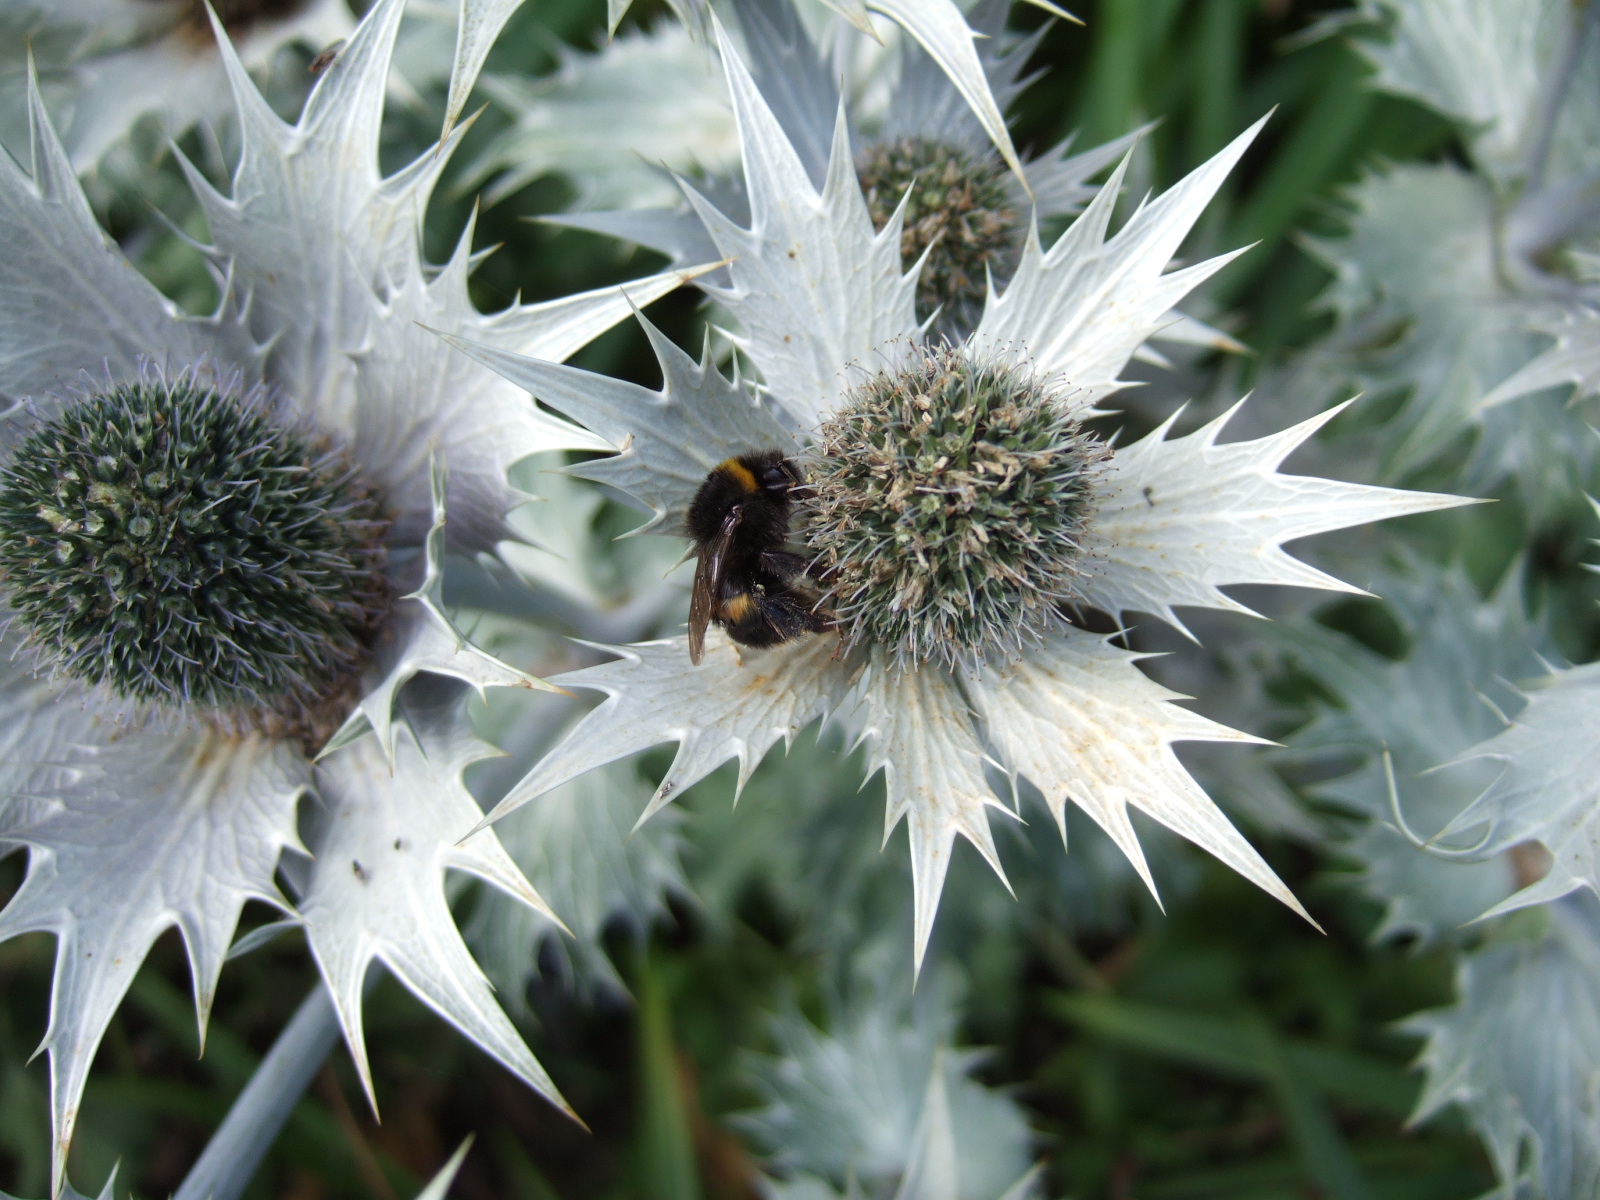 [29July07bumble+bee+on+silver+sea+holly.JPG]